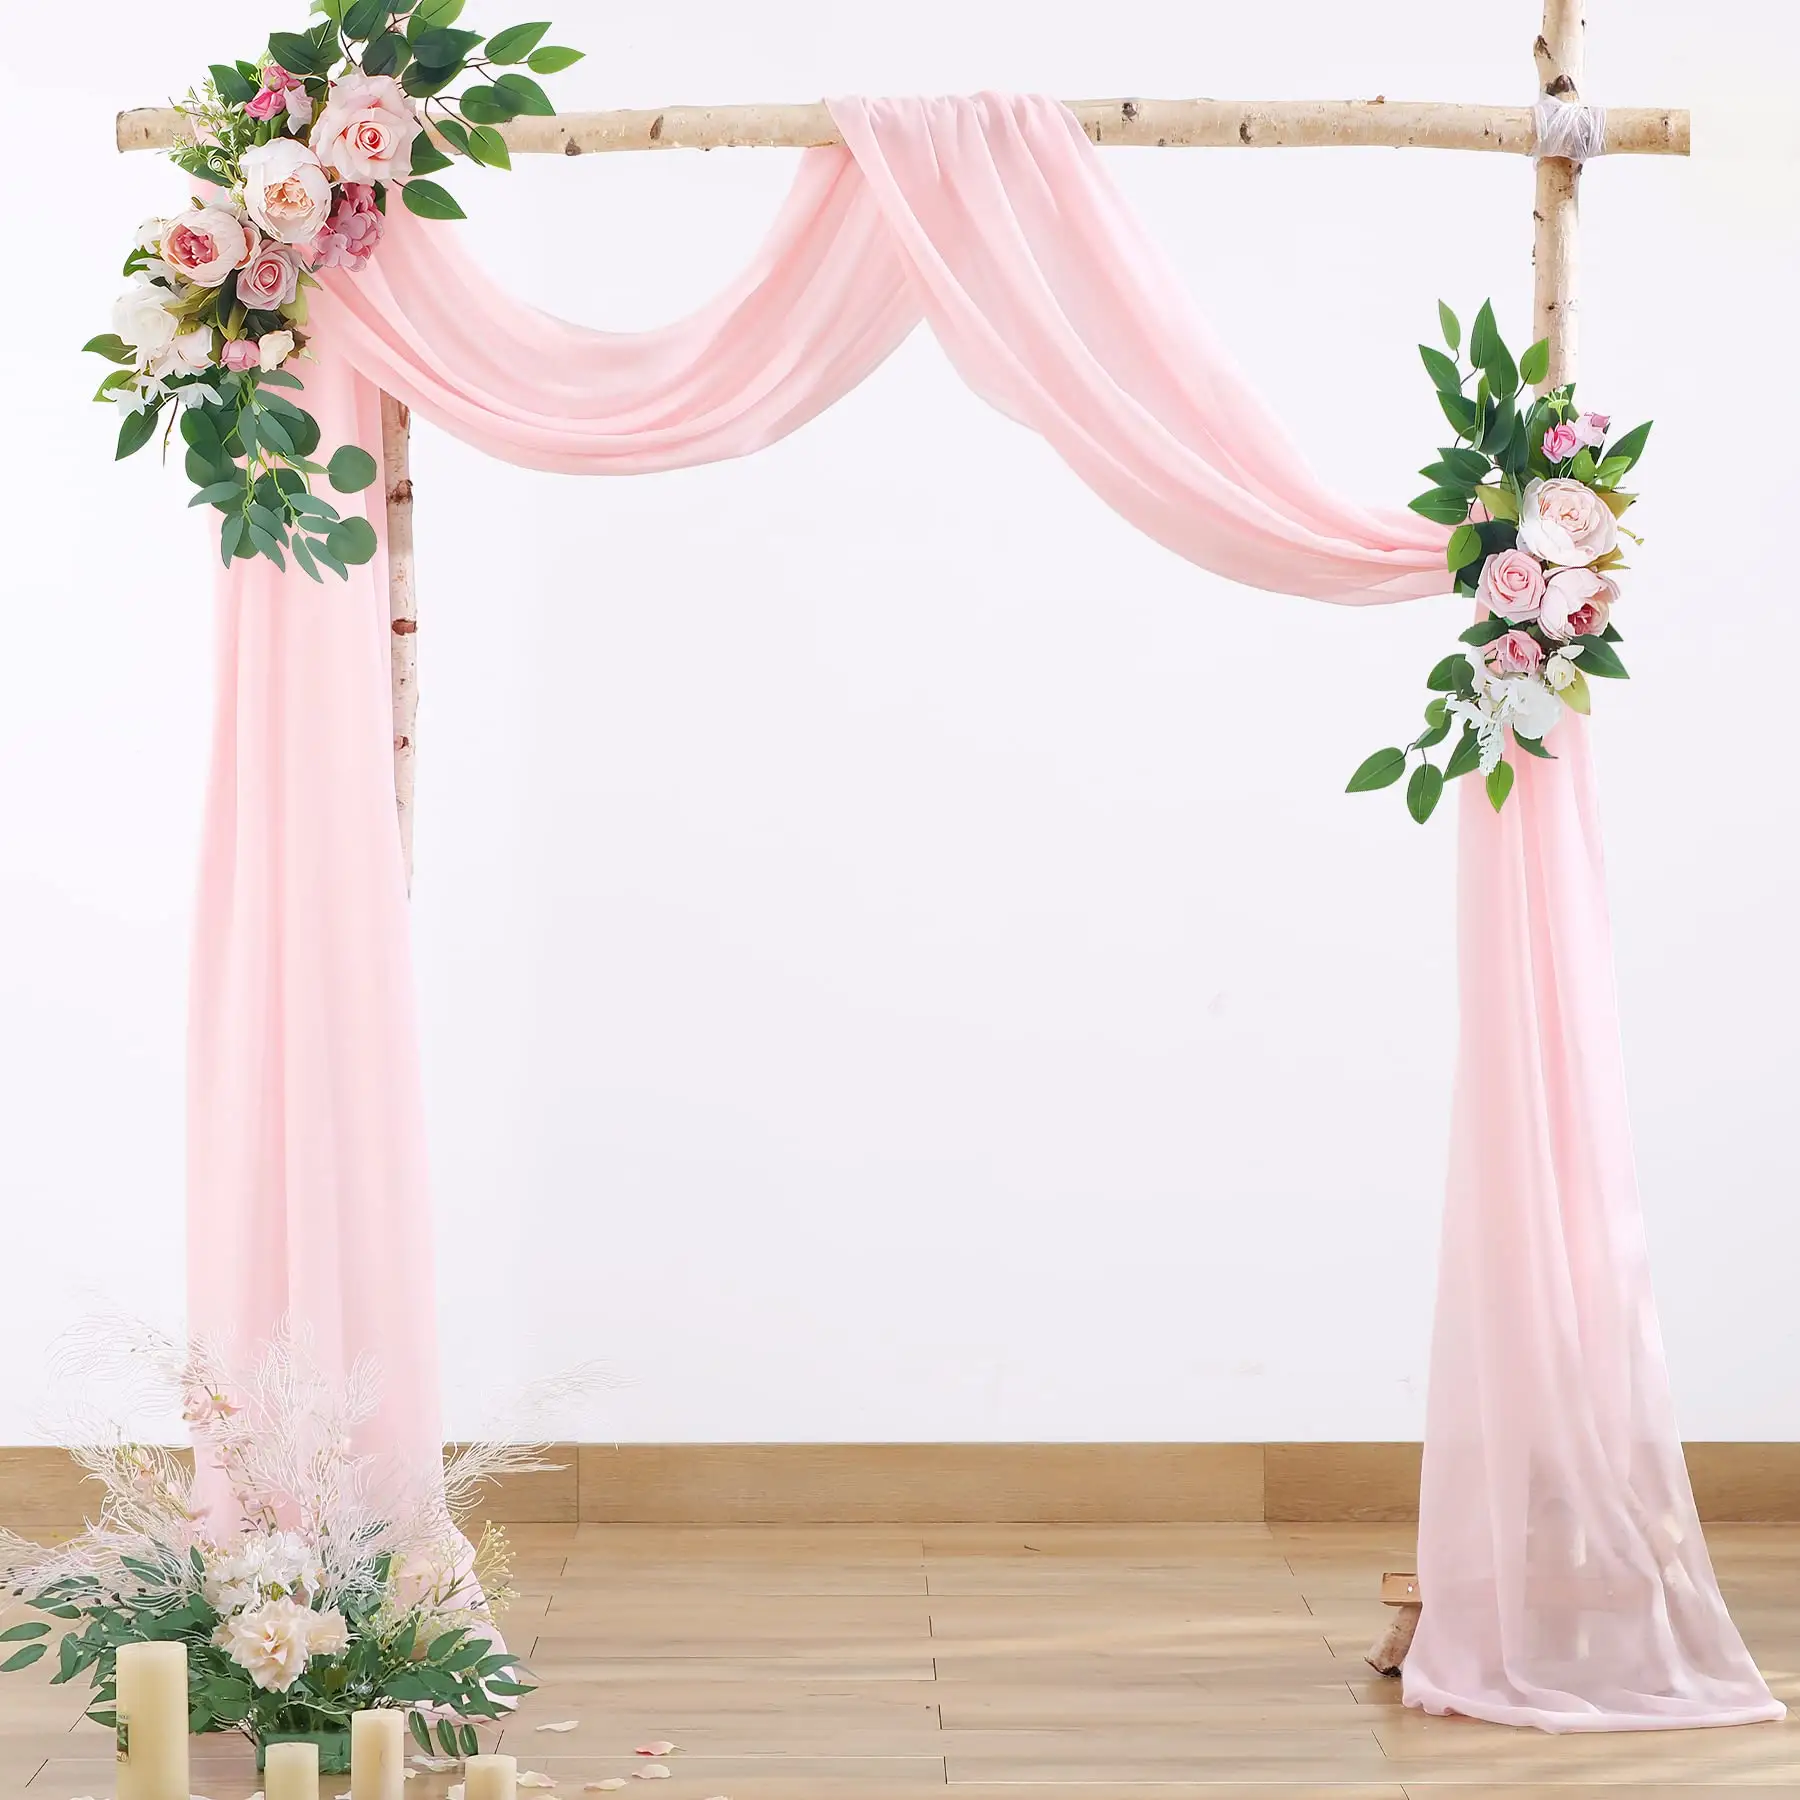 Wholesale 20 ft Polyester White Chiffon Fabric for Curtains Pipe And Drape With Rod Pockets Drapes For Wedding Decoration